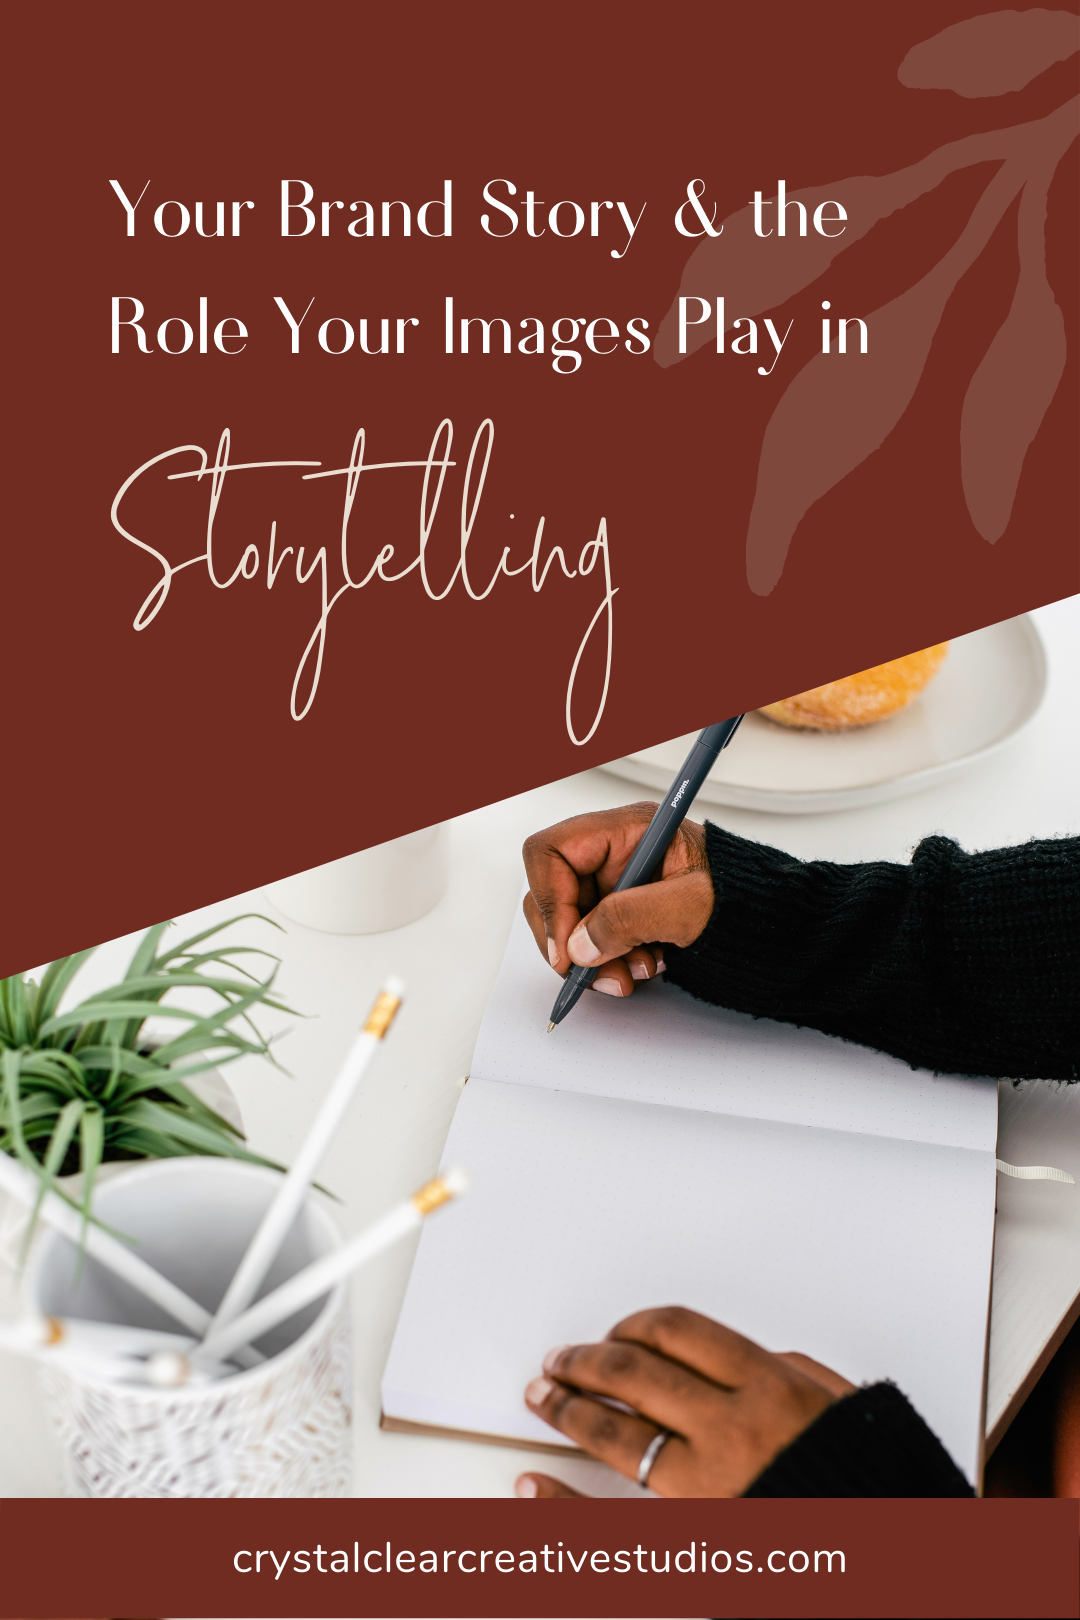 Your Brand Story and the Role Images Play